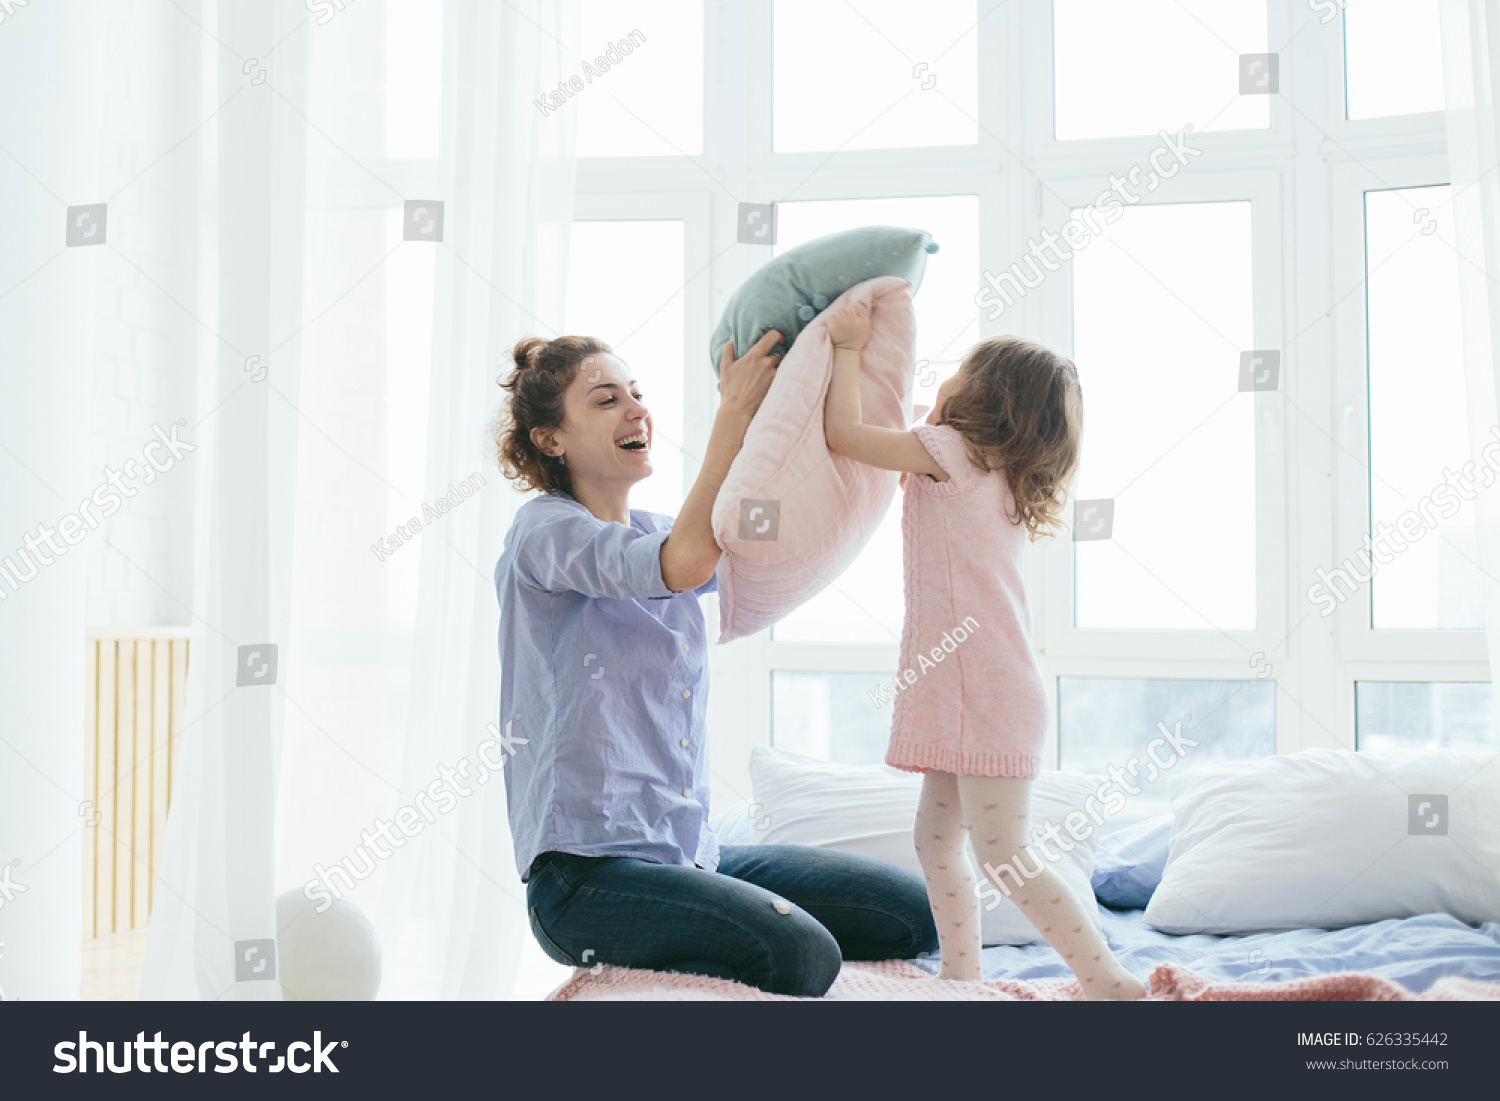 Young mother and her little daughter playing with cushions on bed. Funny pillow fight. Soft pastel colors, pink and blue. Selective focus. Play together and enjoy the moment! Family time on weekend.  #626335442